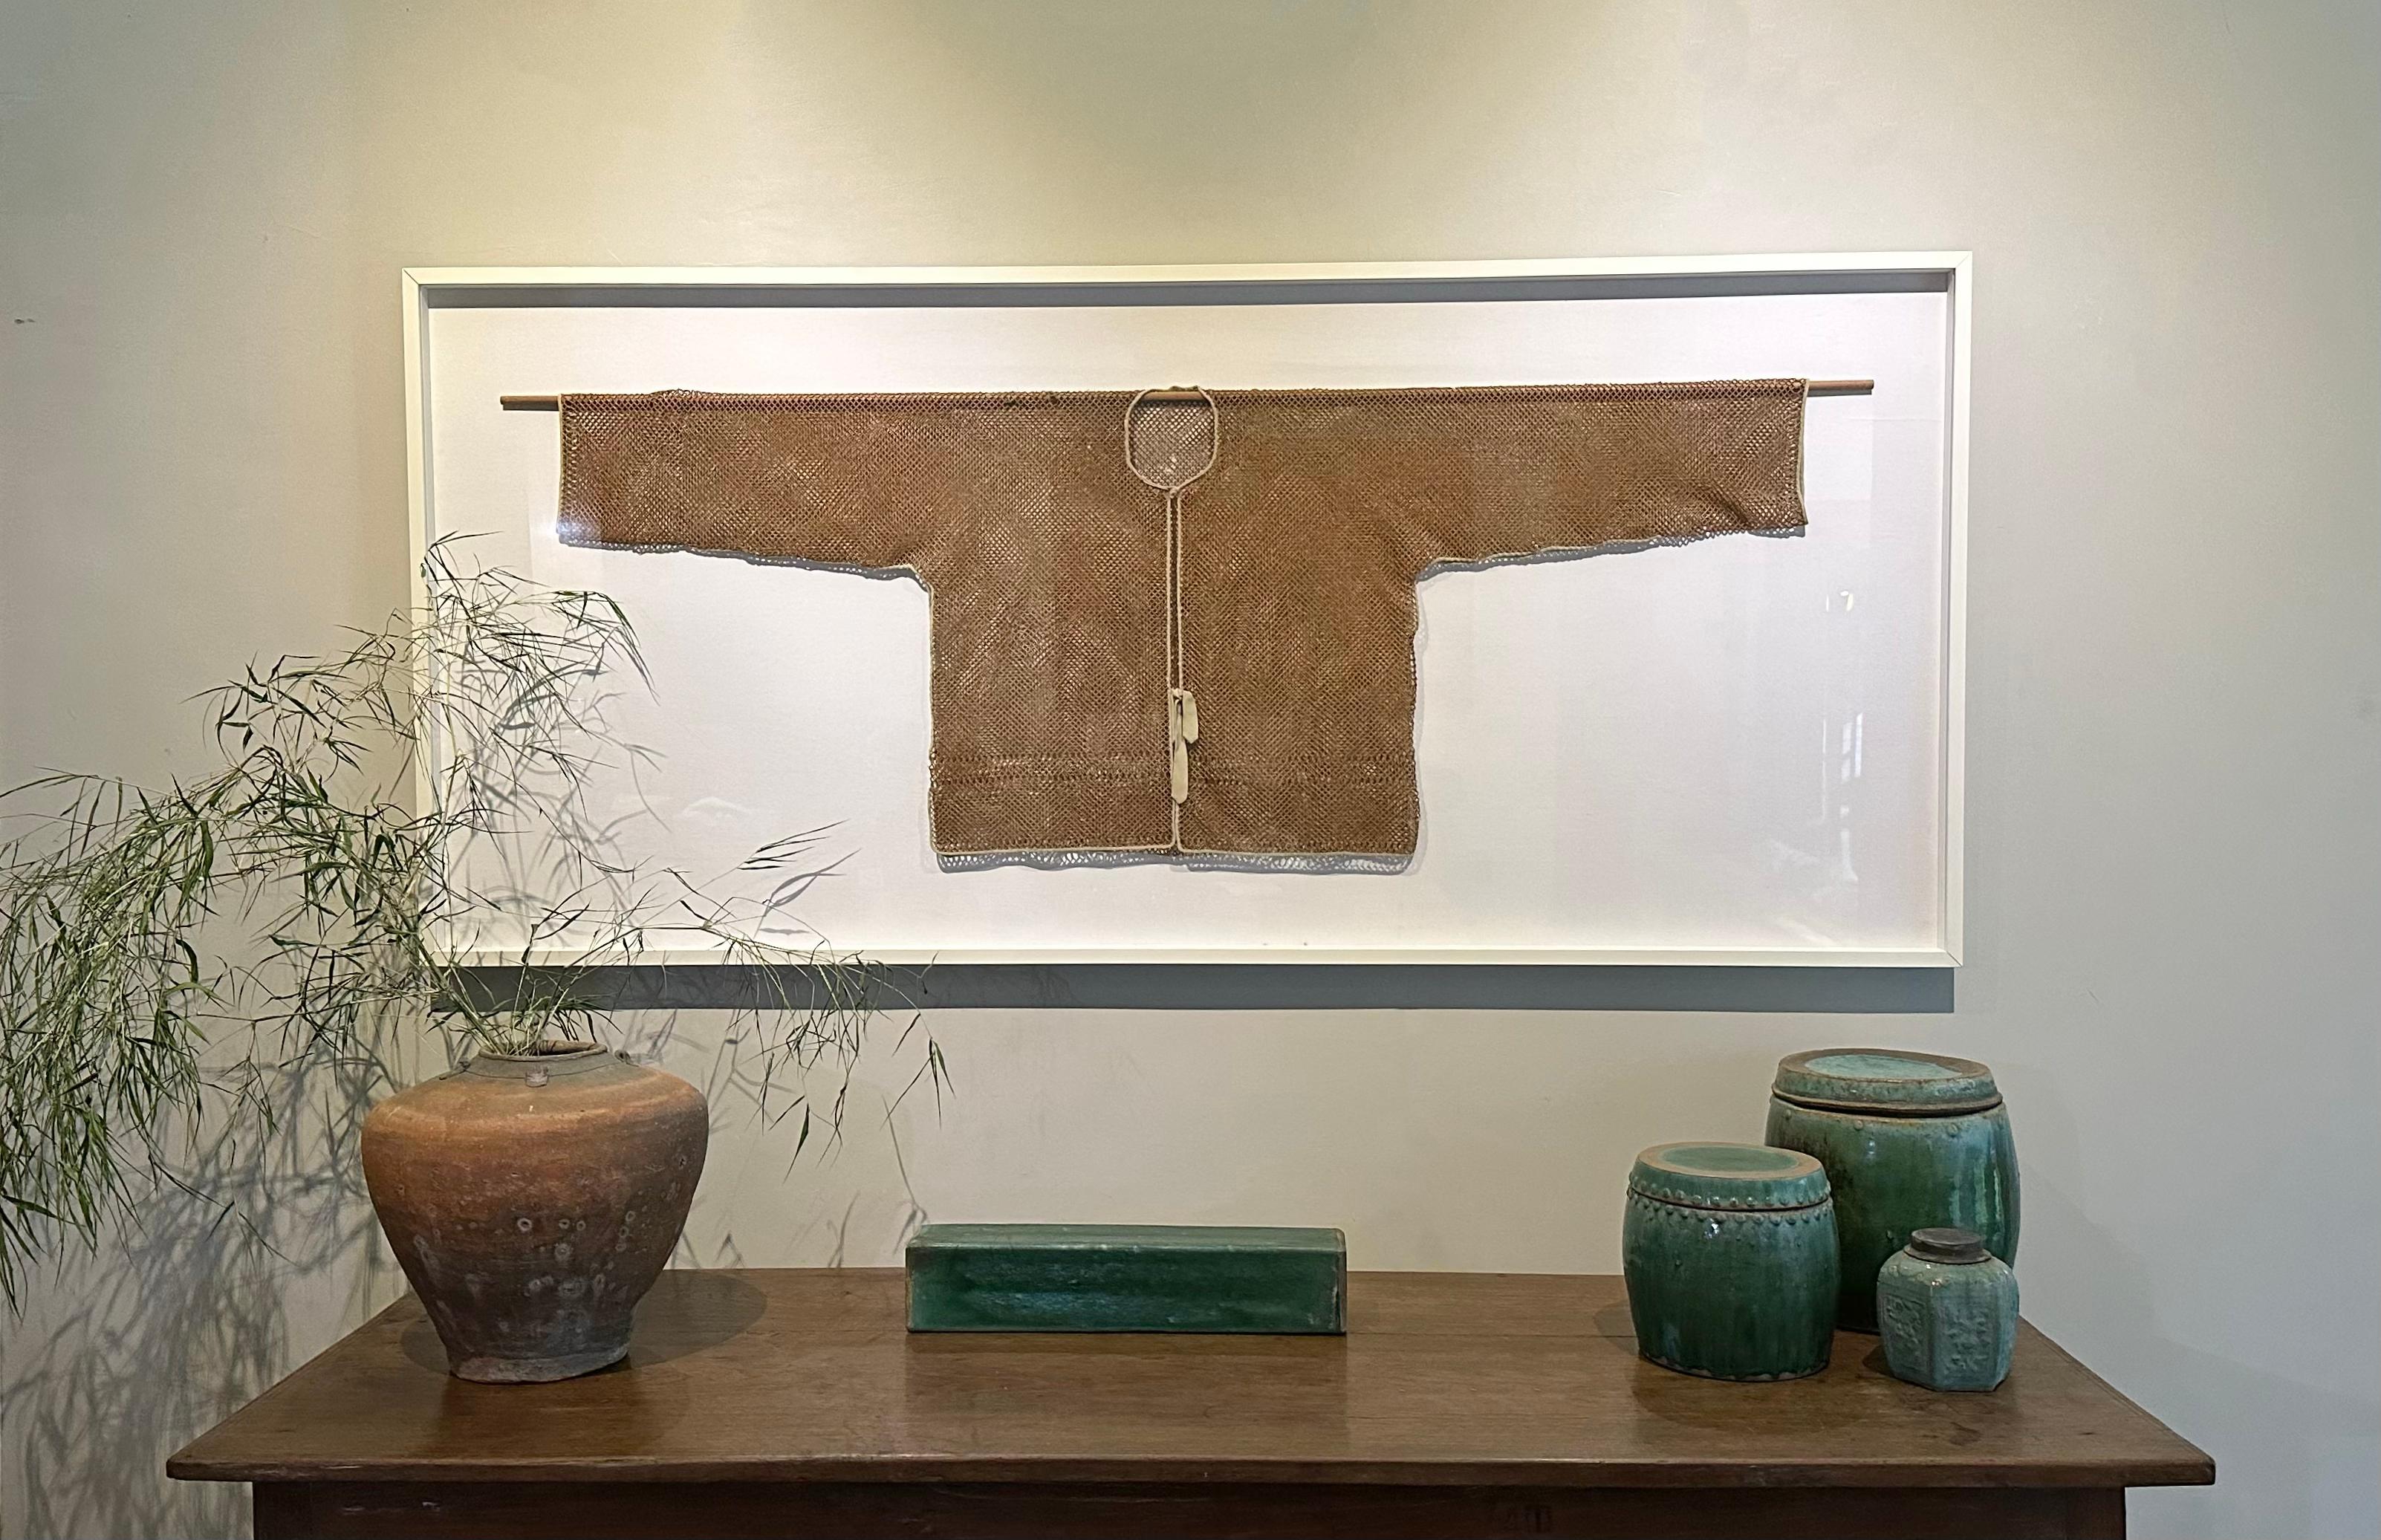 This bamboo vest from the Qing Dynasty required exceptional skill to craft, using extremely thin bamboo shoots and a thin silk lining on the edges. It was worn as an undergarment for ventilation and protecting highly elaborate and expensive silk